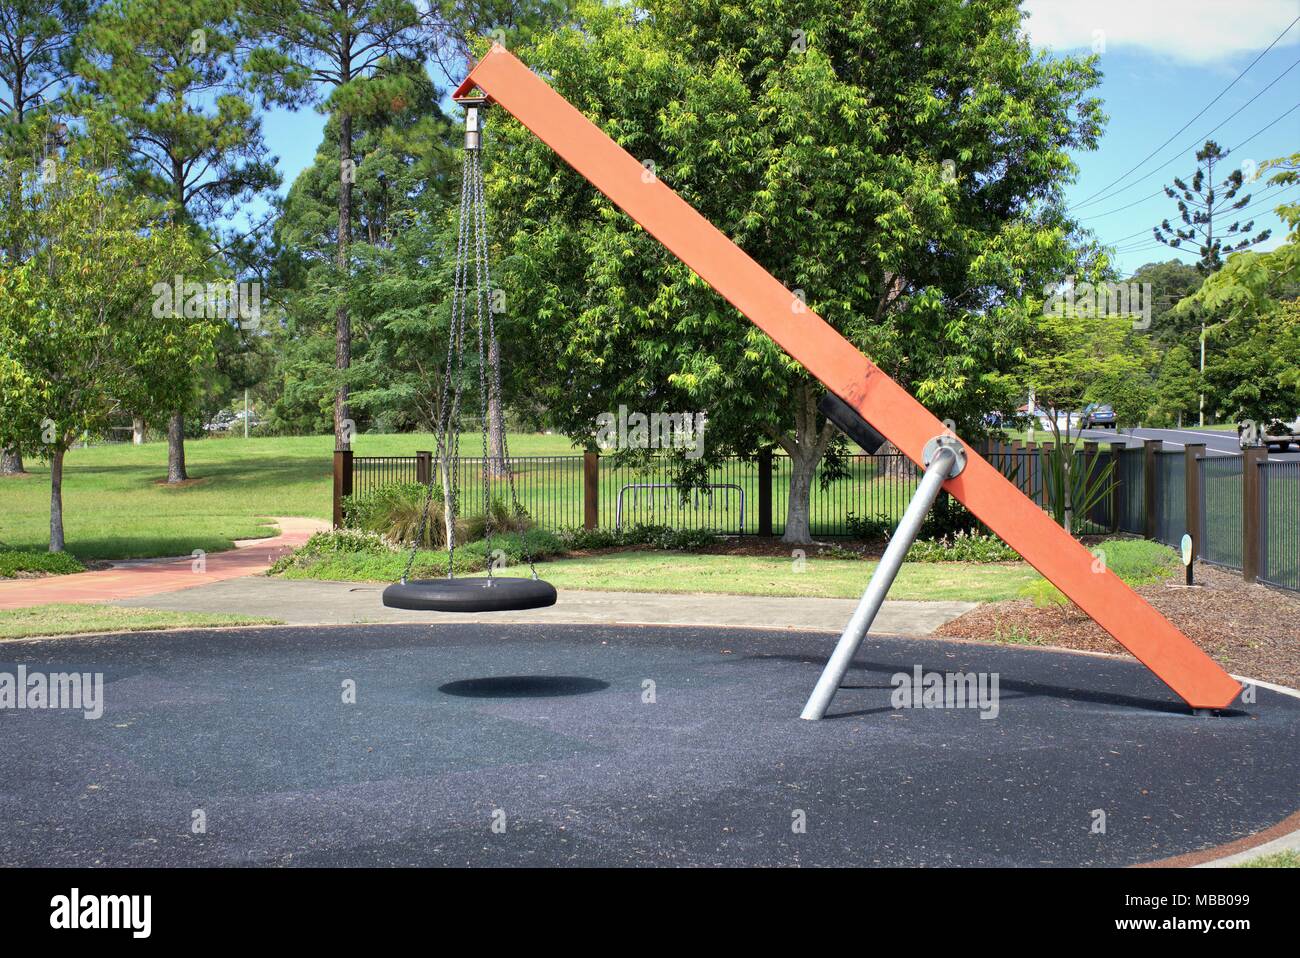 Swing in public park. Empty tire swing tied with metal chains to metal beam in children's park. Kids park in Australia. Stock Photo